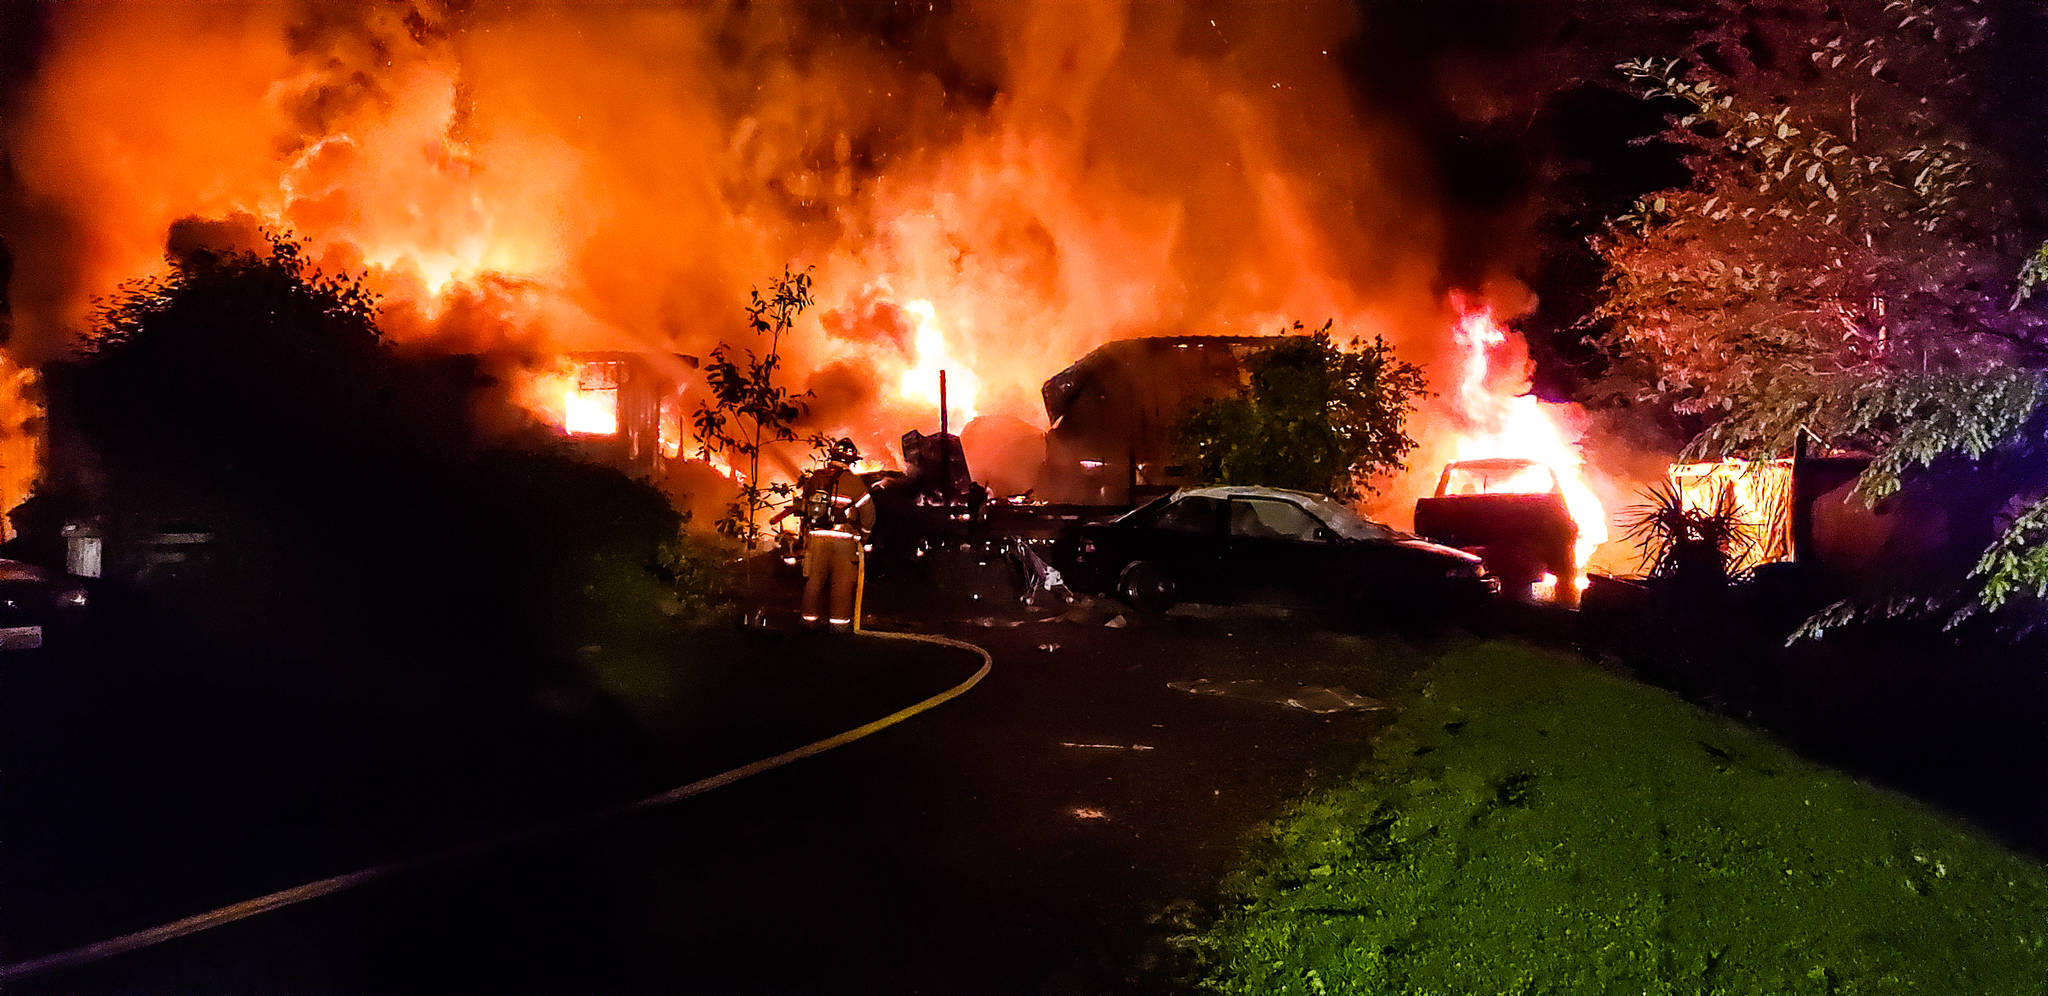 One fatality was reported at the scene of an overnight trailer fire in Satsop Wednesday morning. (Photo provided by Fire District #5)